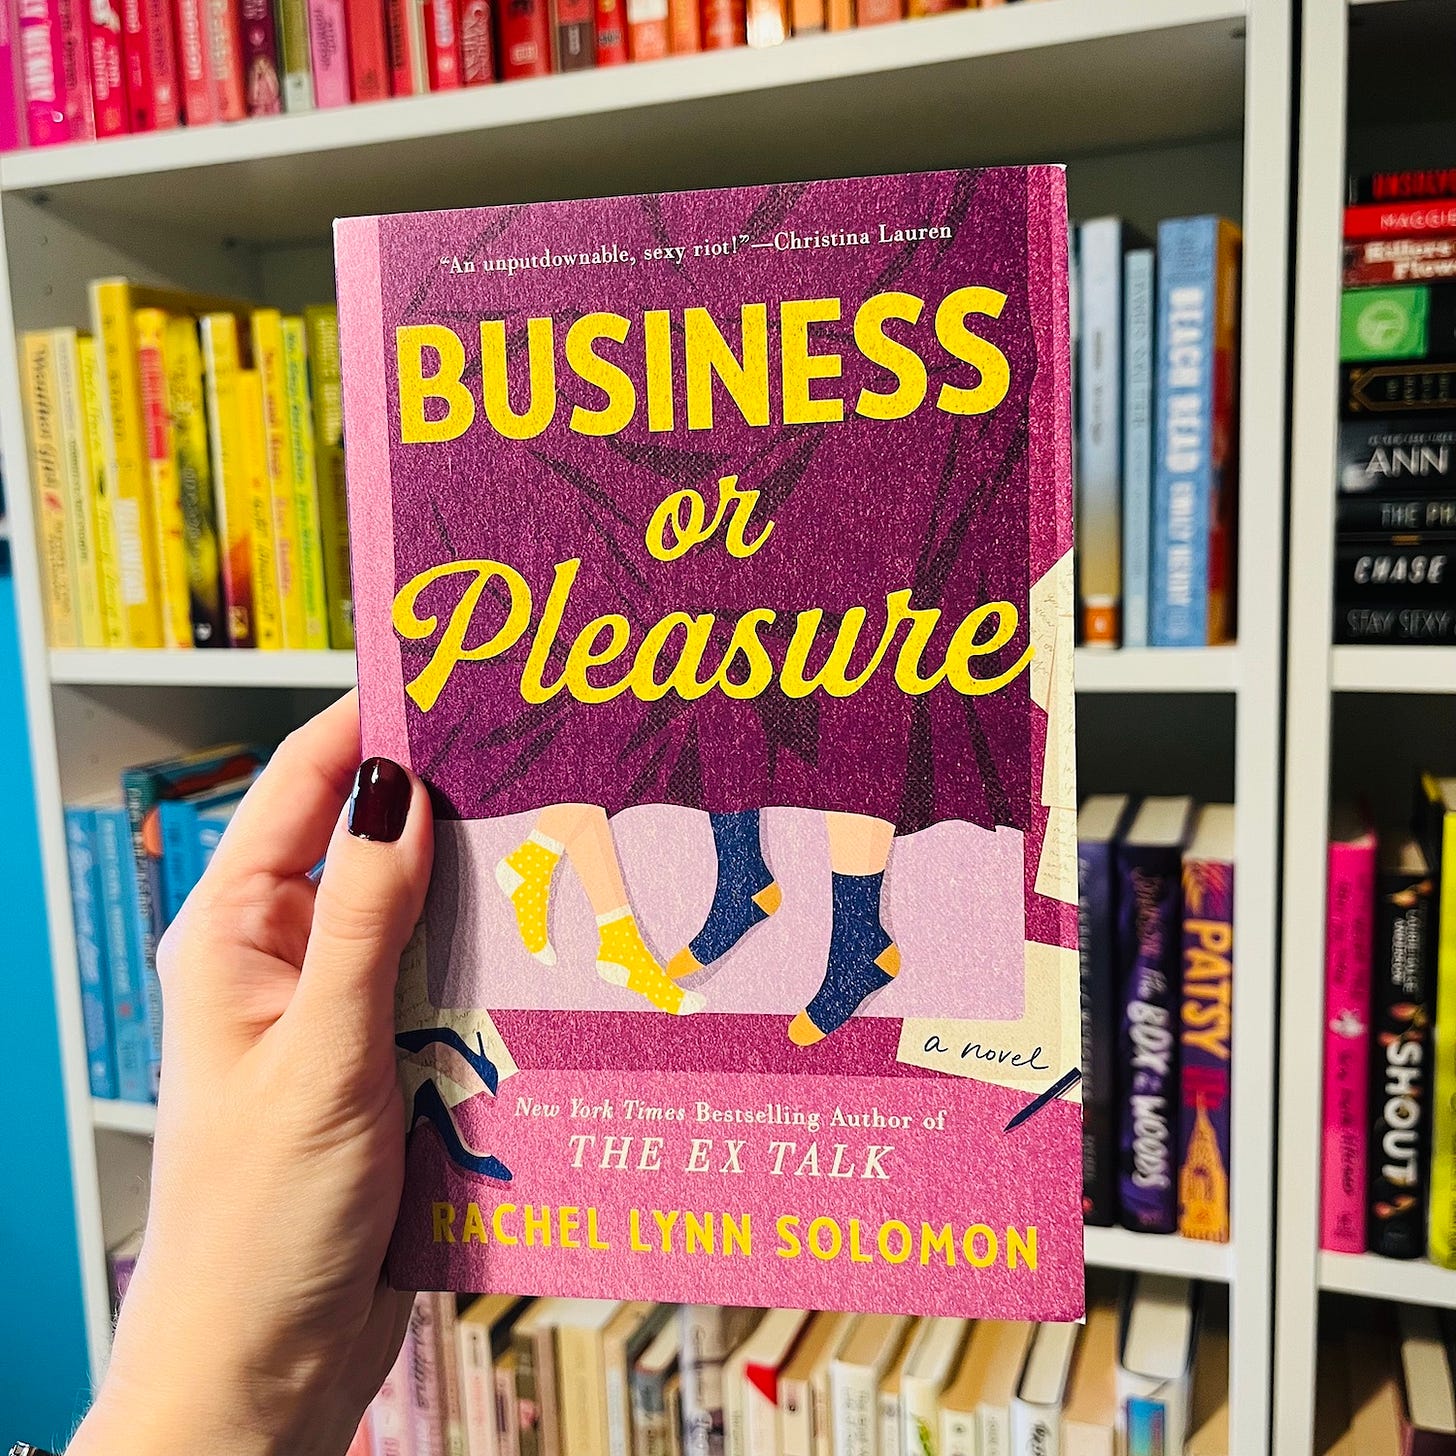 A hand holding the book Business or Pleasure by Rachel Lynn Solomon in front of a bookshelf.